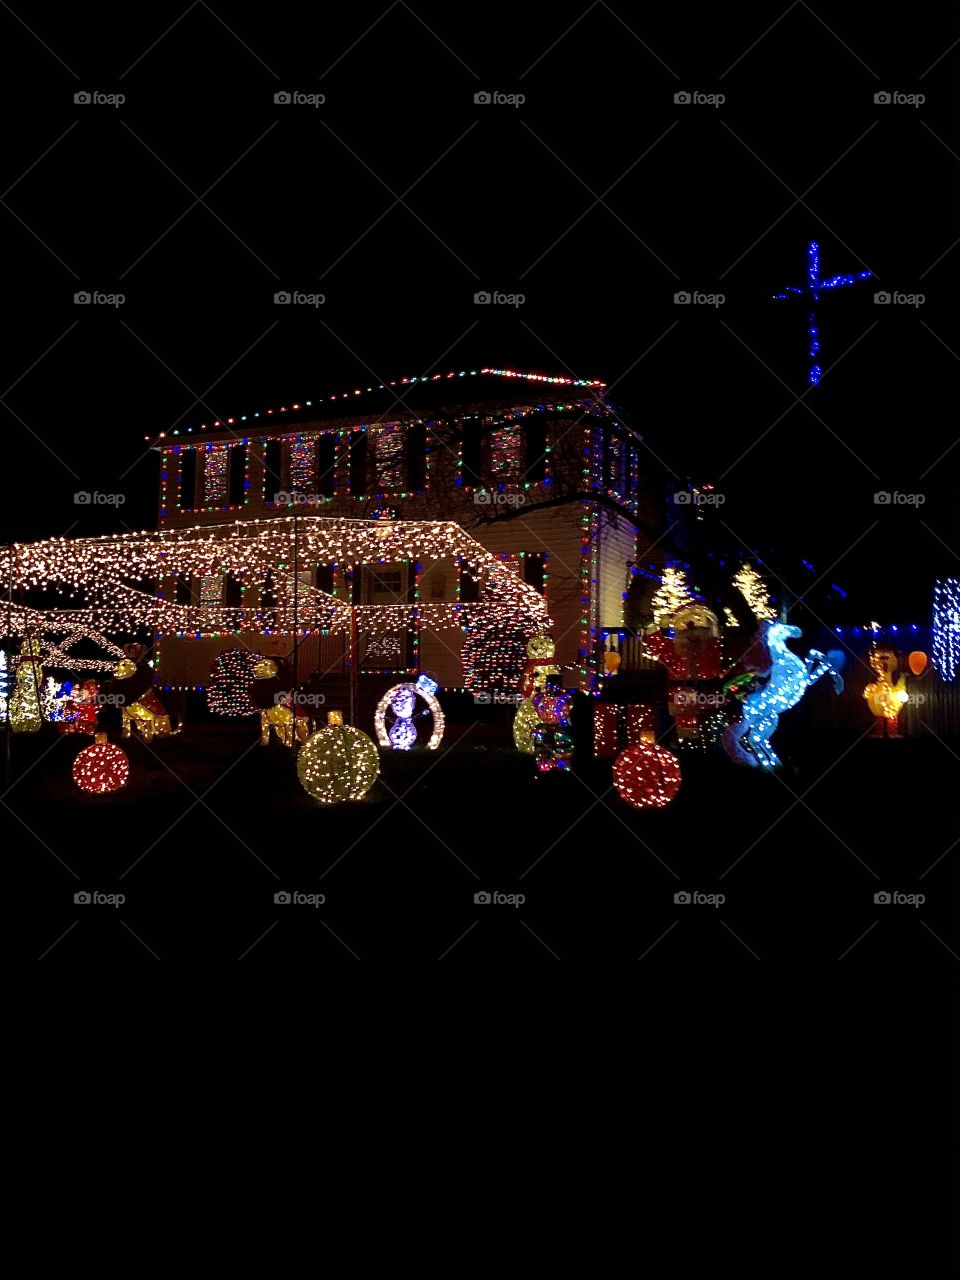 House decorated with colorful Christmas Lights and festive holiday decor.